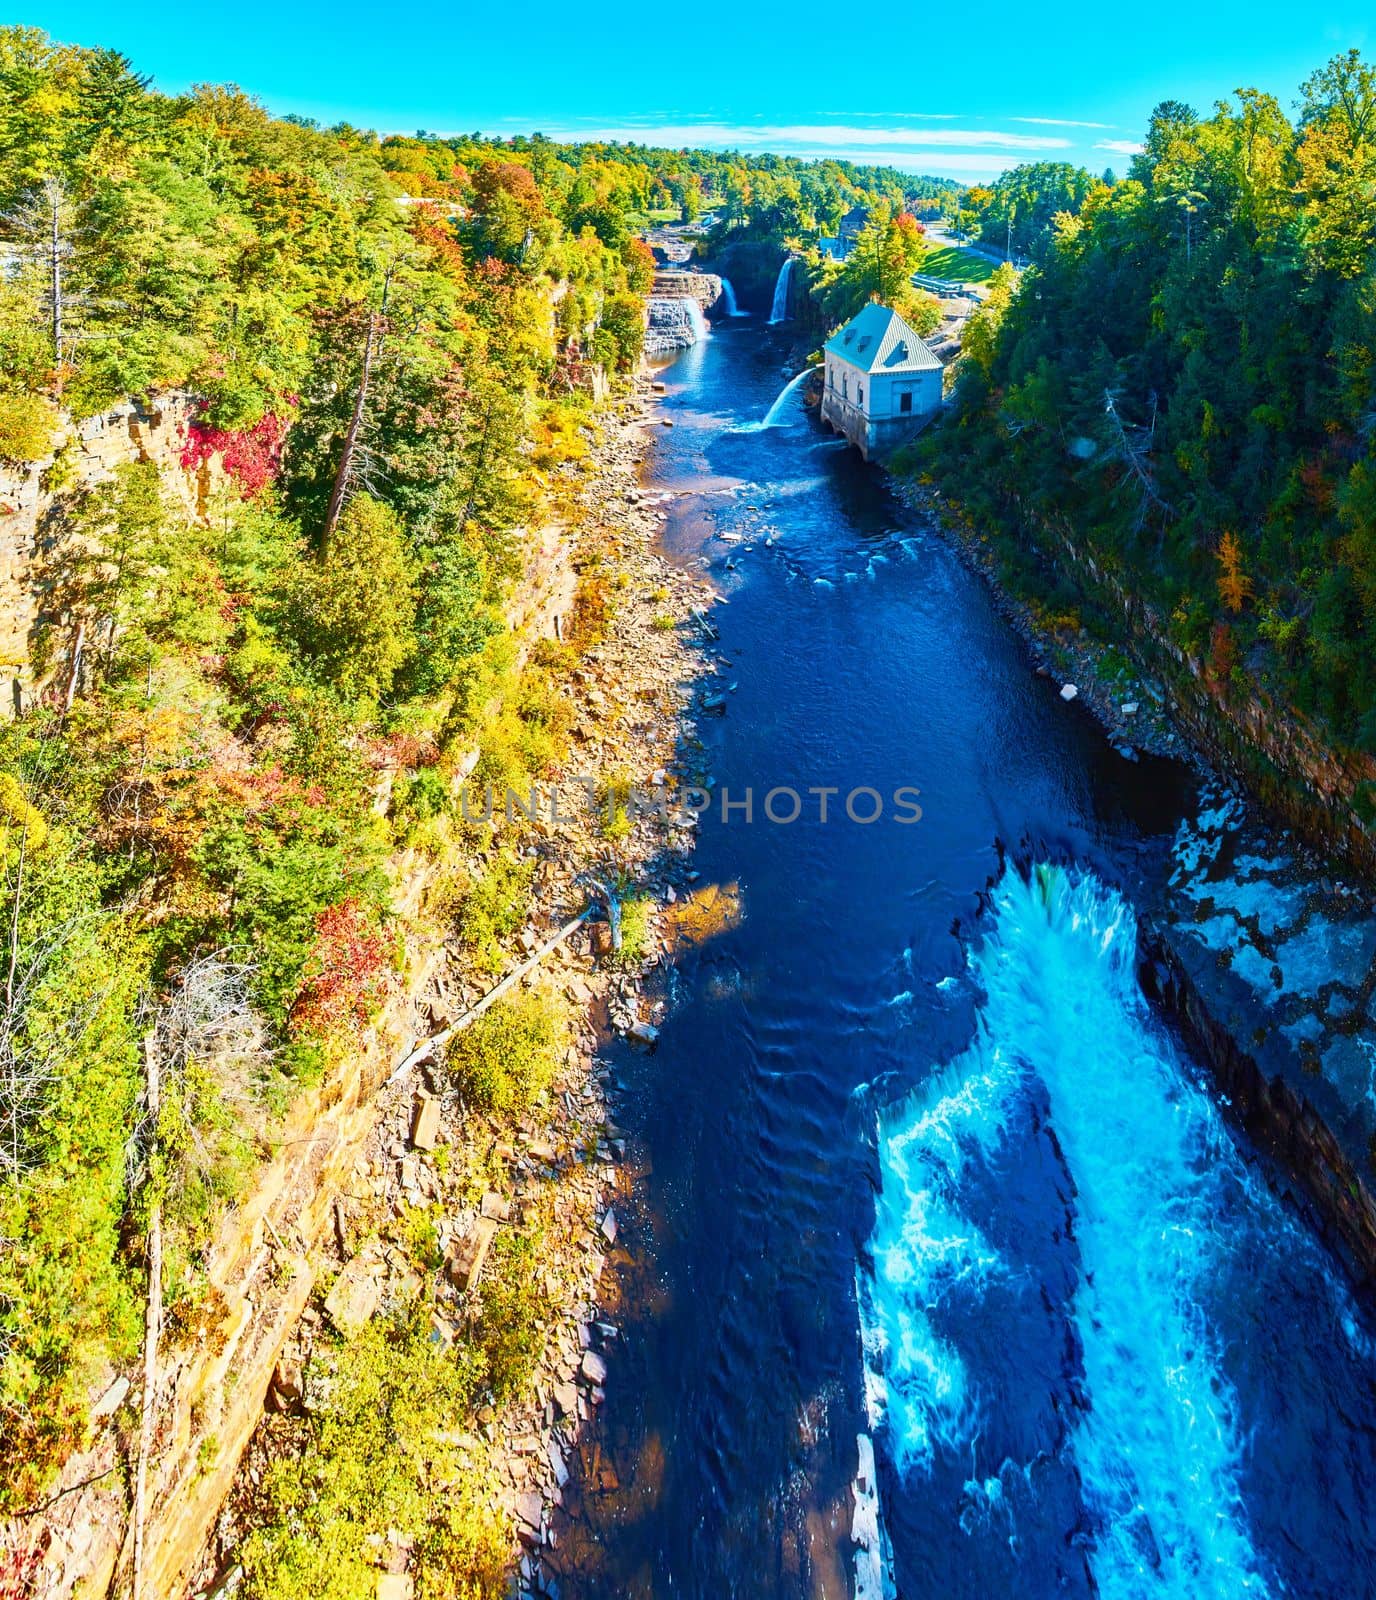 Image of Aerial over stunning canyon with Hydroelectric power plant and multiple large waterfalls over cliffs